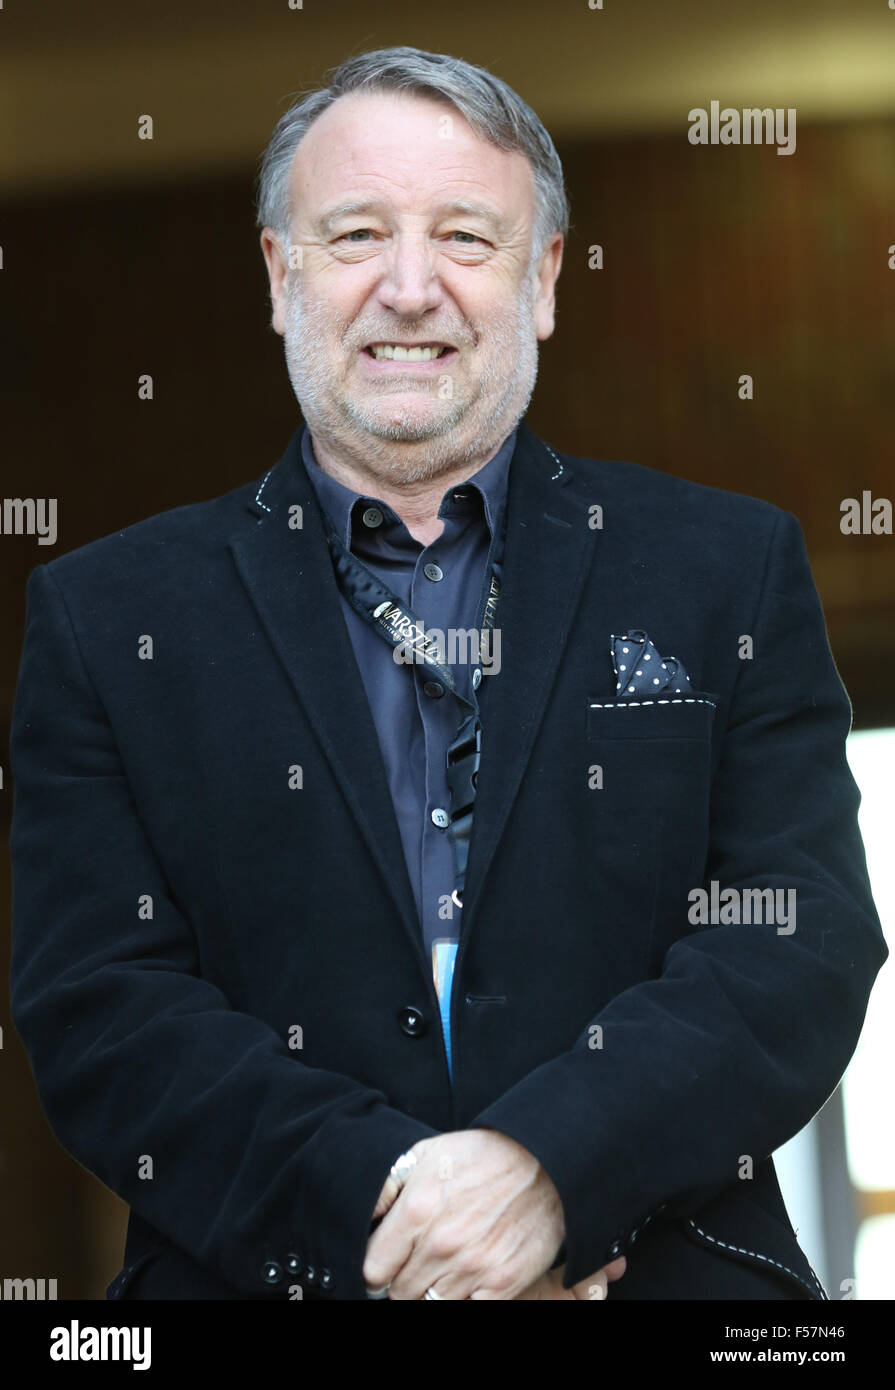 Dusseldorf, Germany. 29 October 2015. Electricity Conference celebrating electronic music in the capital of this genre. Joy Division, New Order and The Light bassist, Peter Hook, discusses his musical career and influences, with questions by Rob Keane. Credit:  Ashley Greb/Alamy Live News Stock Photo